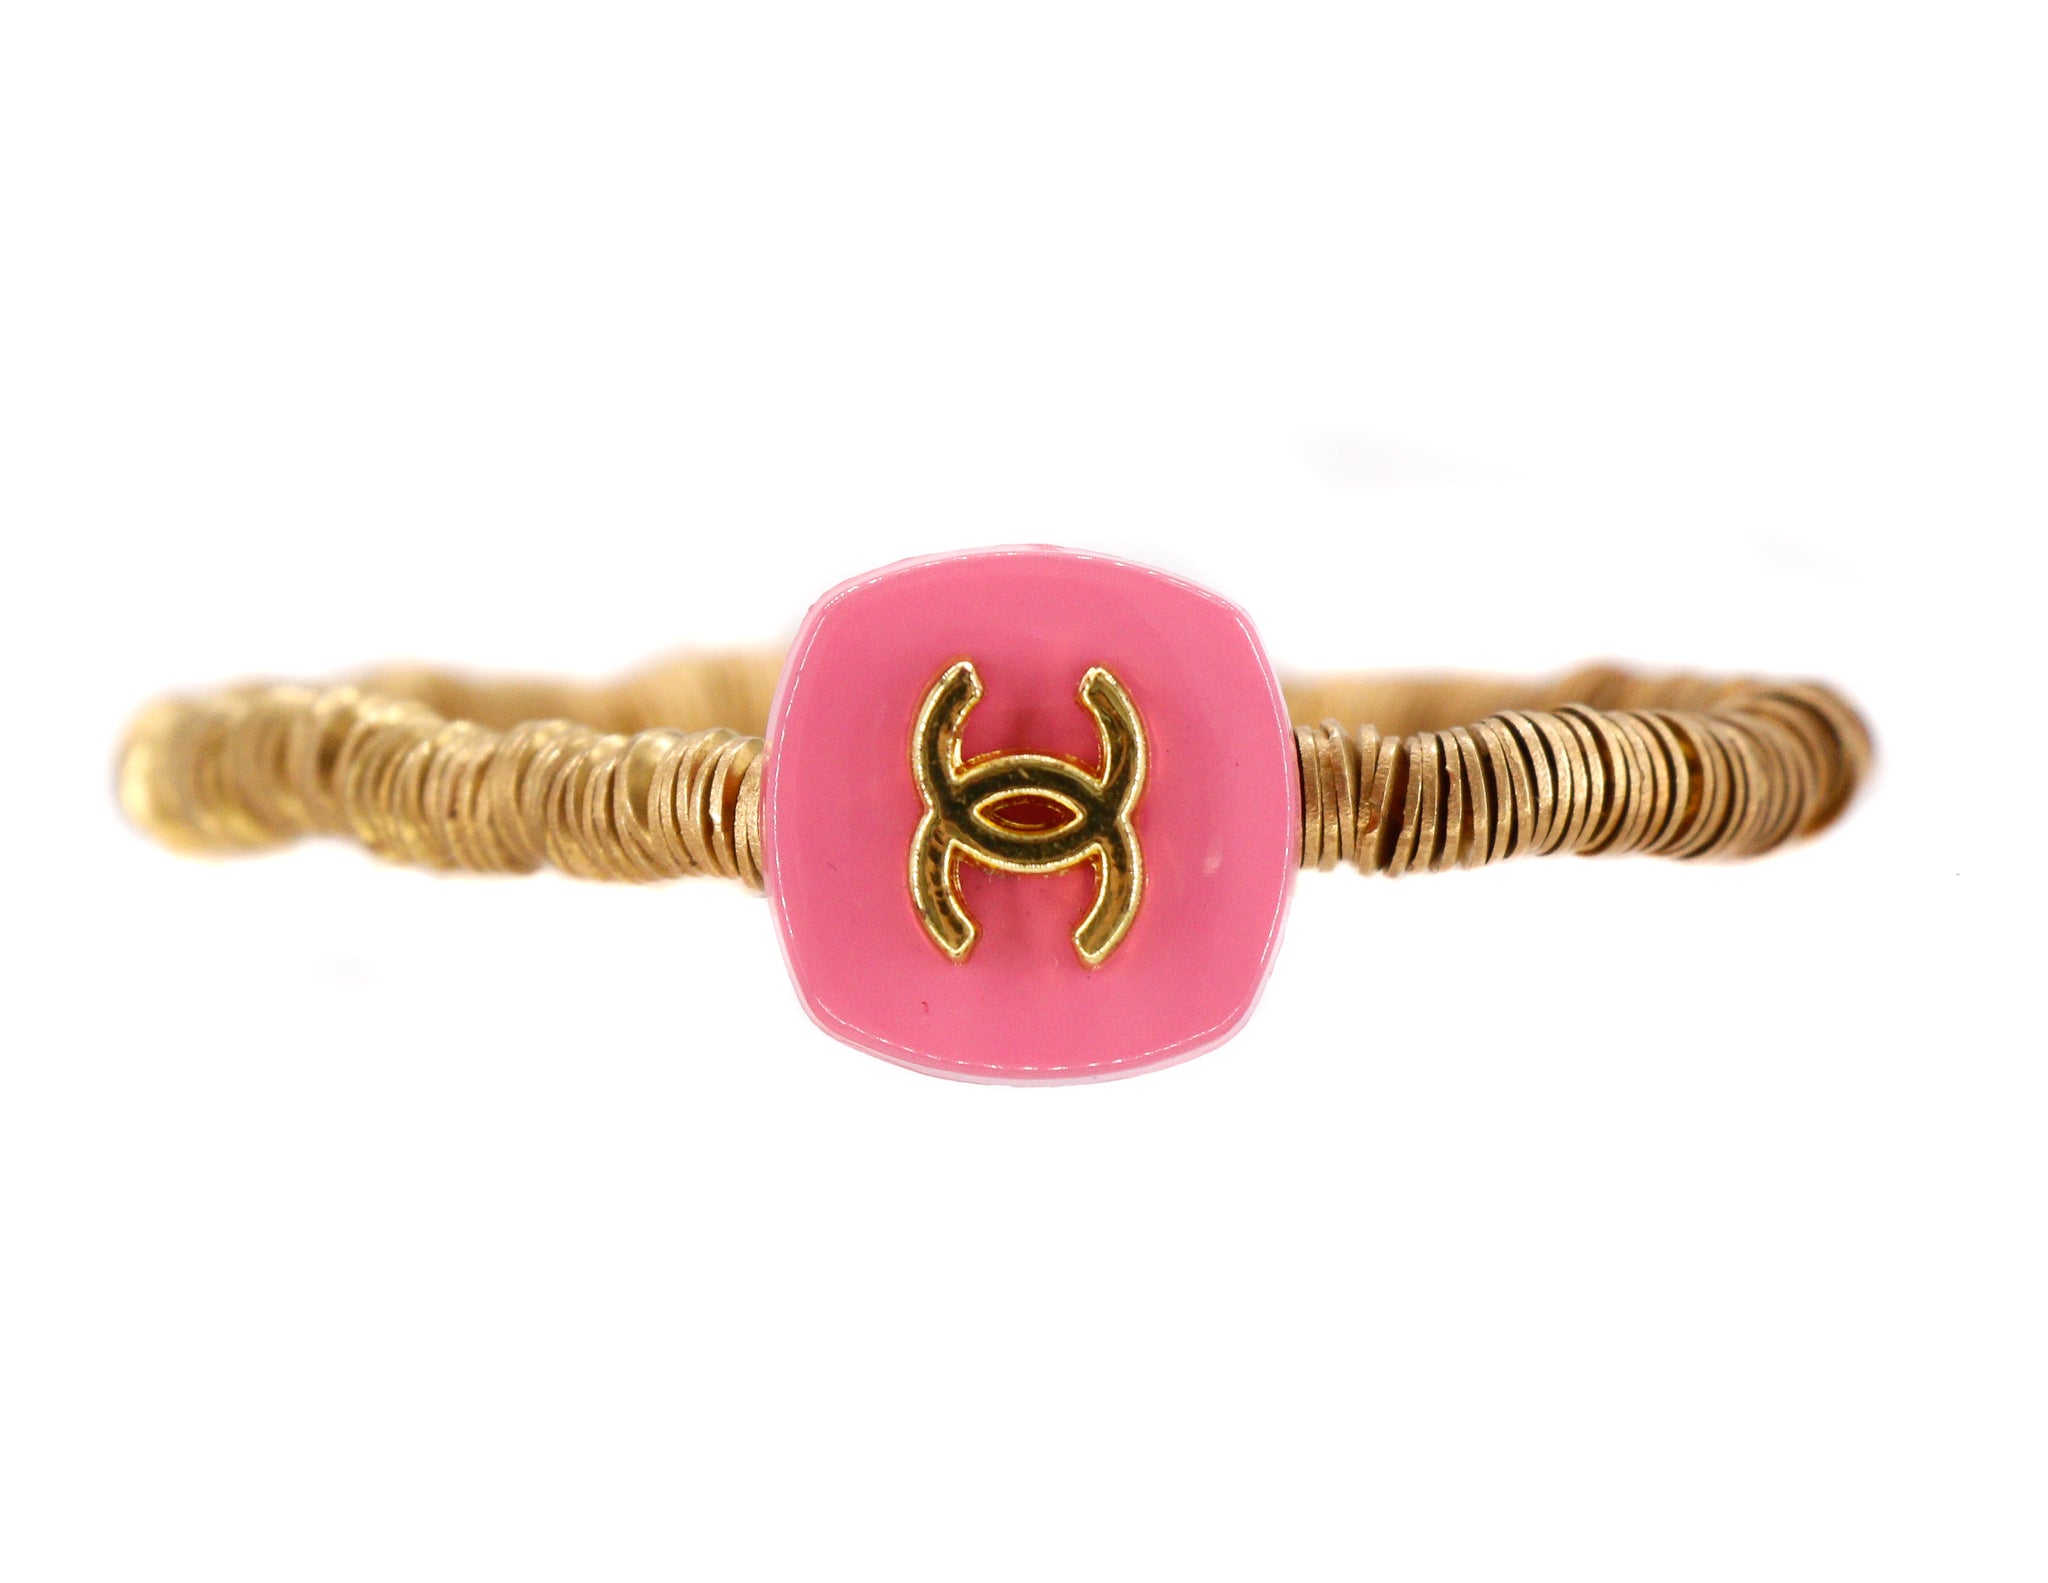 Brass heishi bead bracelet with a pink repurposed designer button